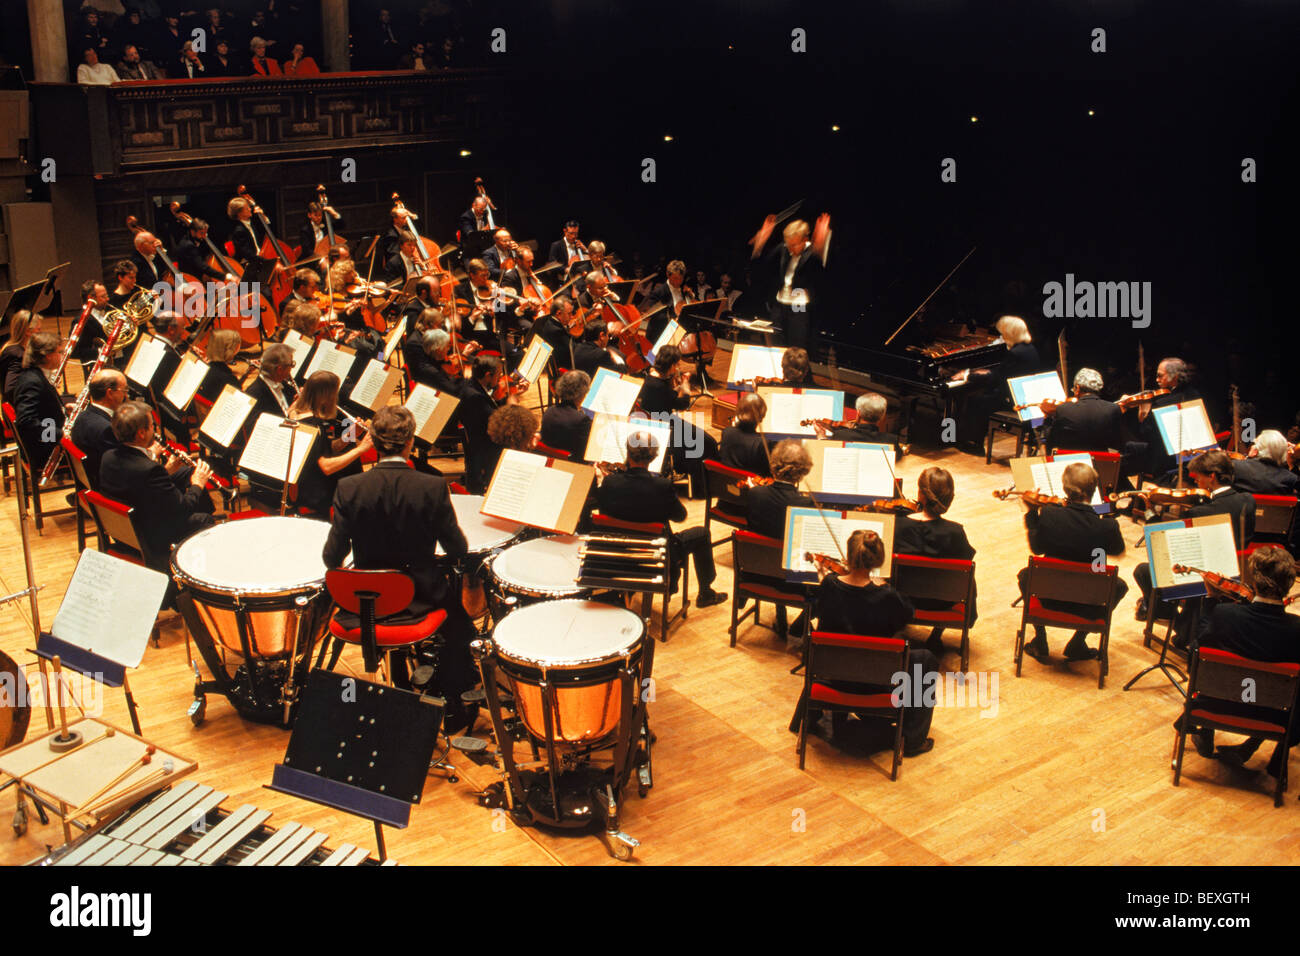 Stockholm Philharmonic Orchestra performing in Stockholm Concert House Stock Photo